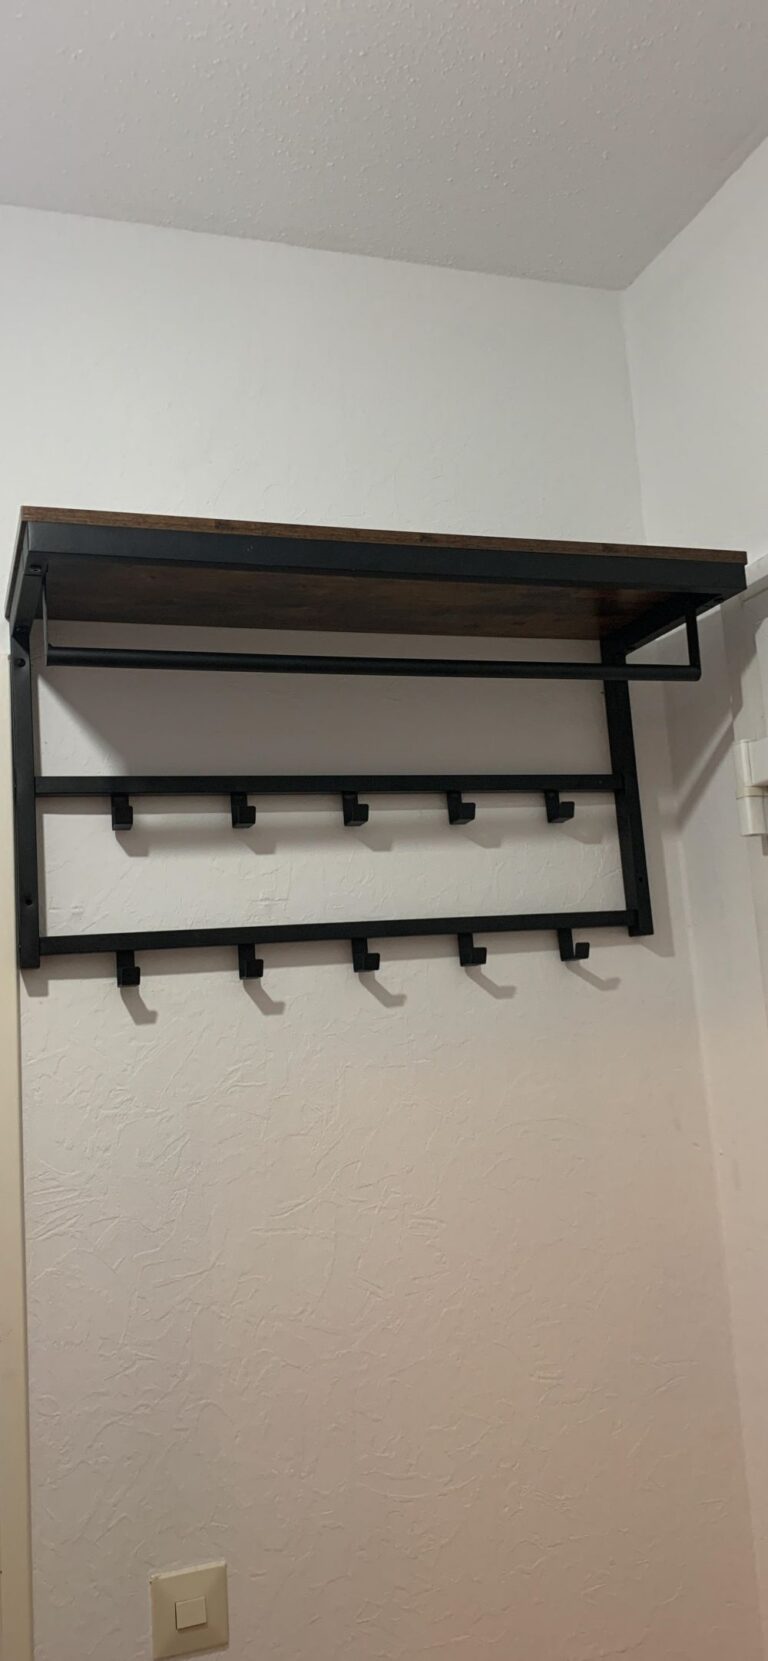 BF60YM01 Wall Mounted Coat Rack photo review